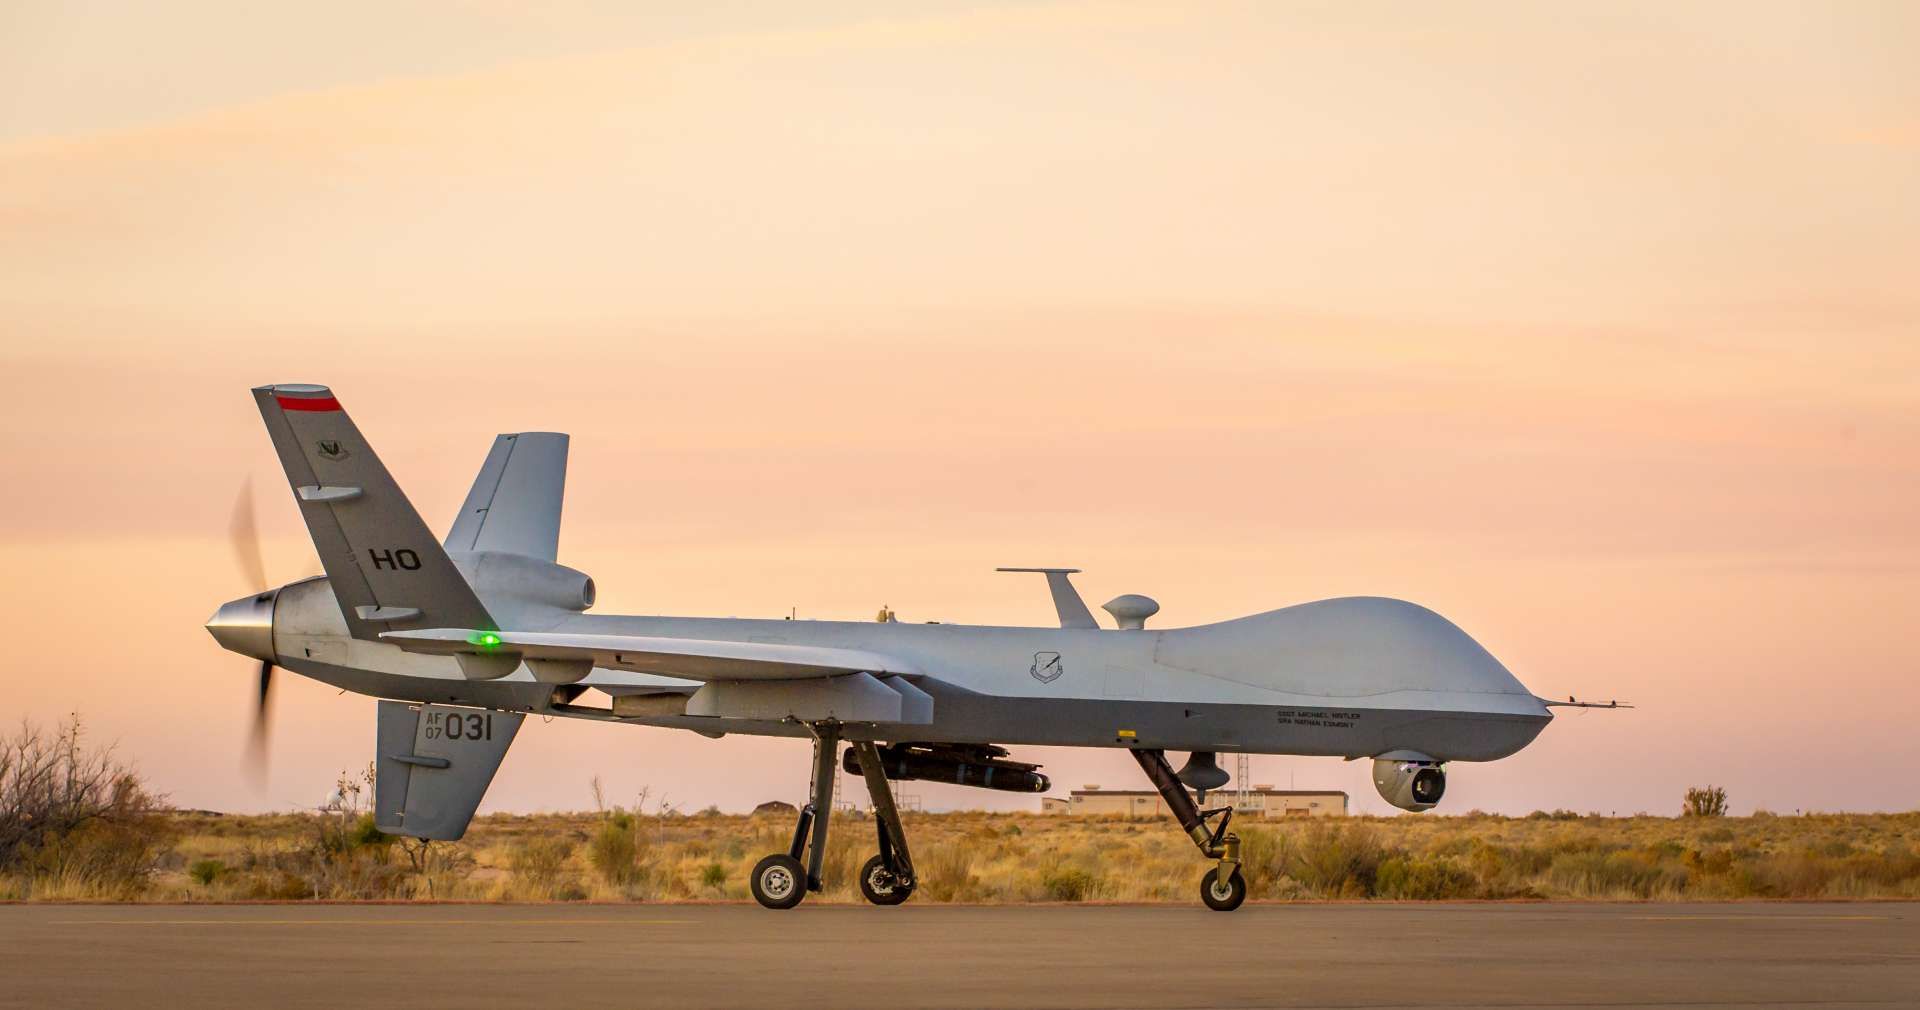 Yemens%20Houthis%20now%20destroyed%20more%20than%20150%20Million%20of%20American%20drones%20after%20burning%20a%20fifth%20MQ-9%20Reaper%20925%20003-8259a2b0.jpeg